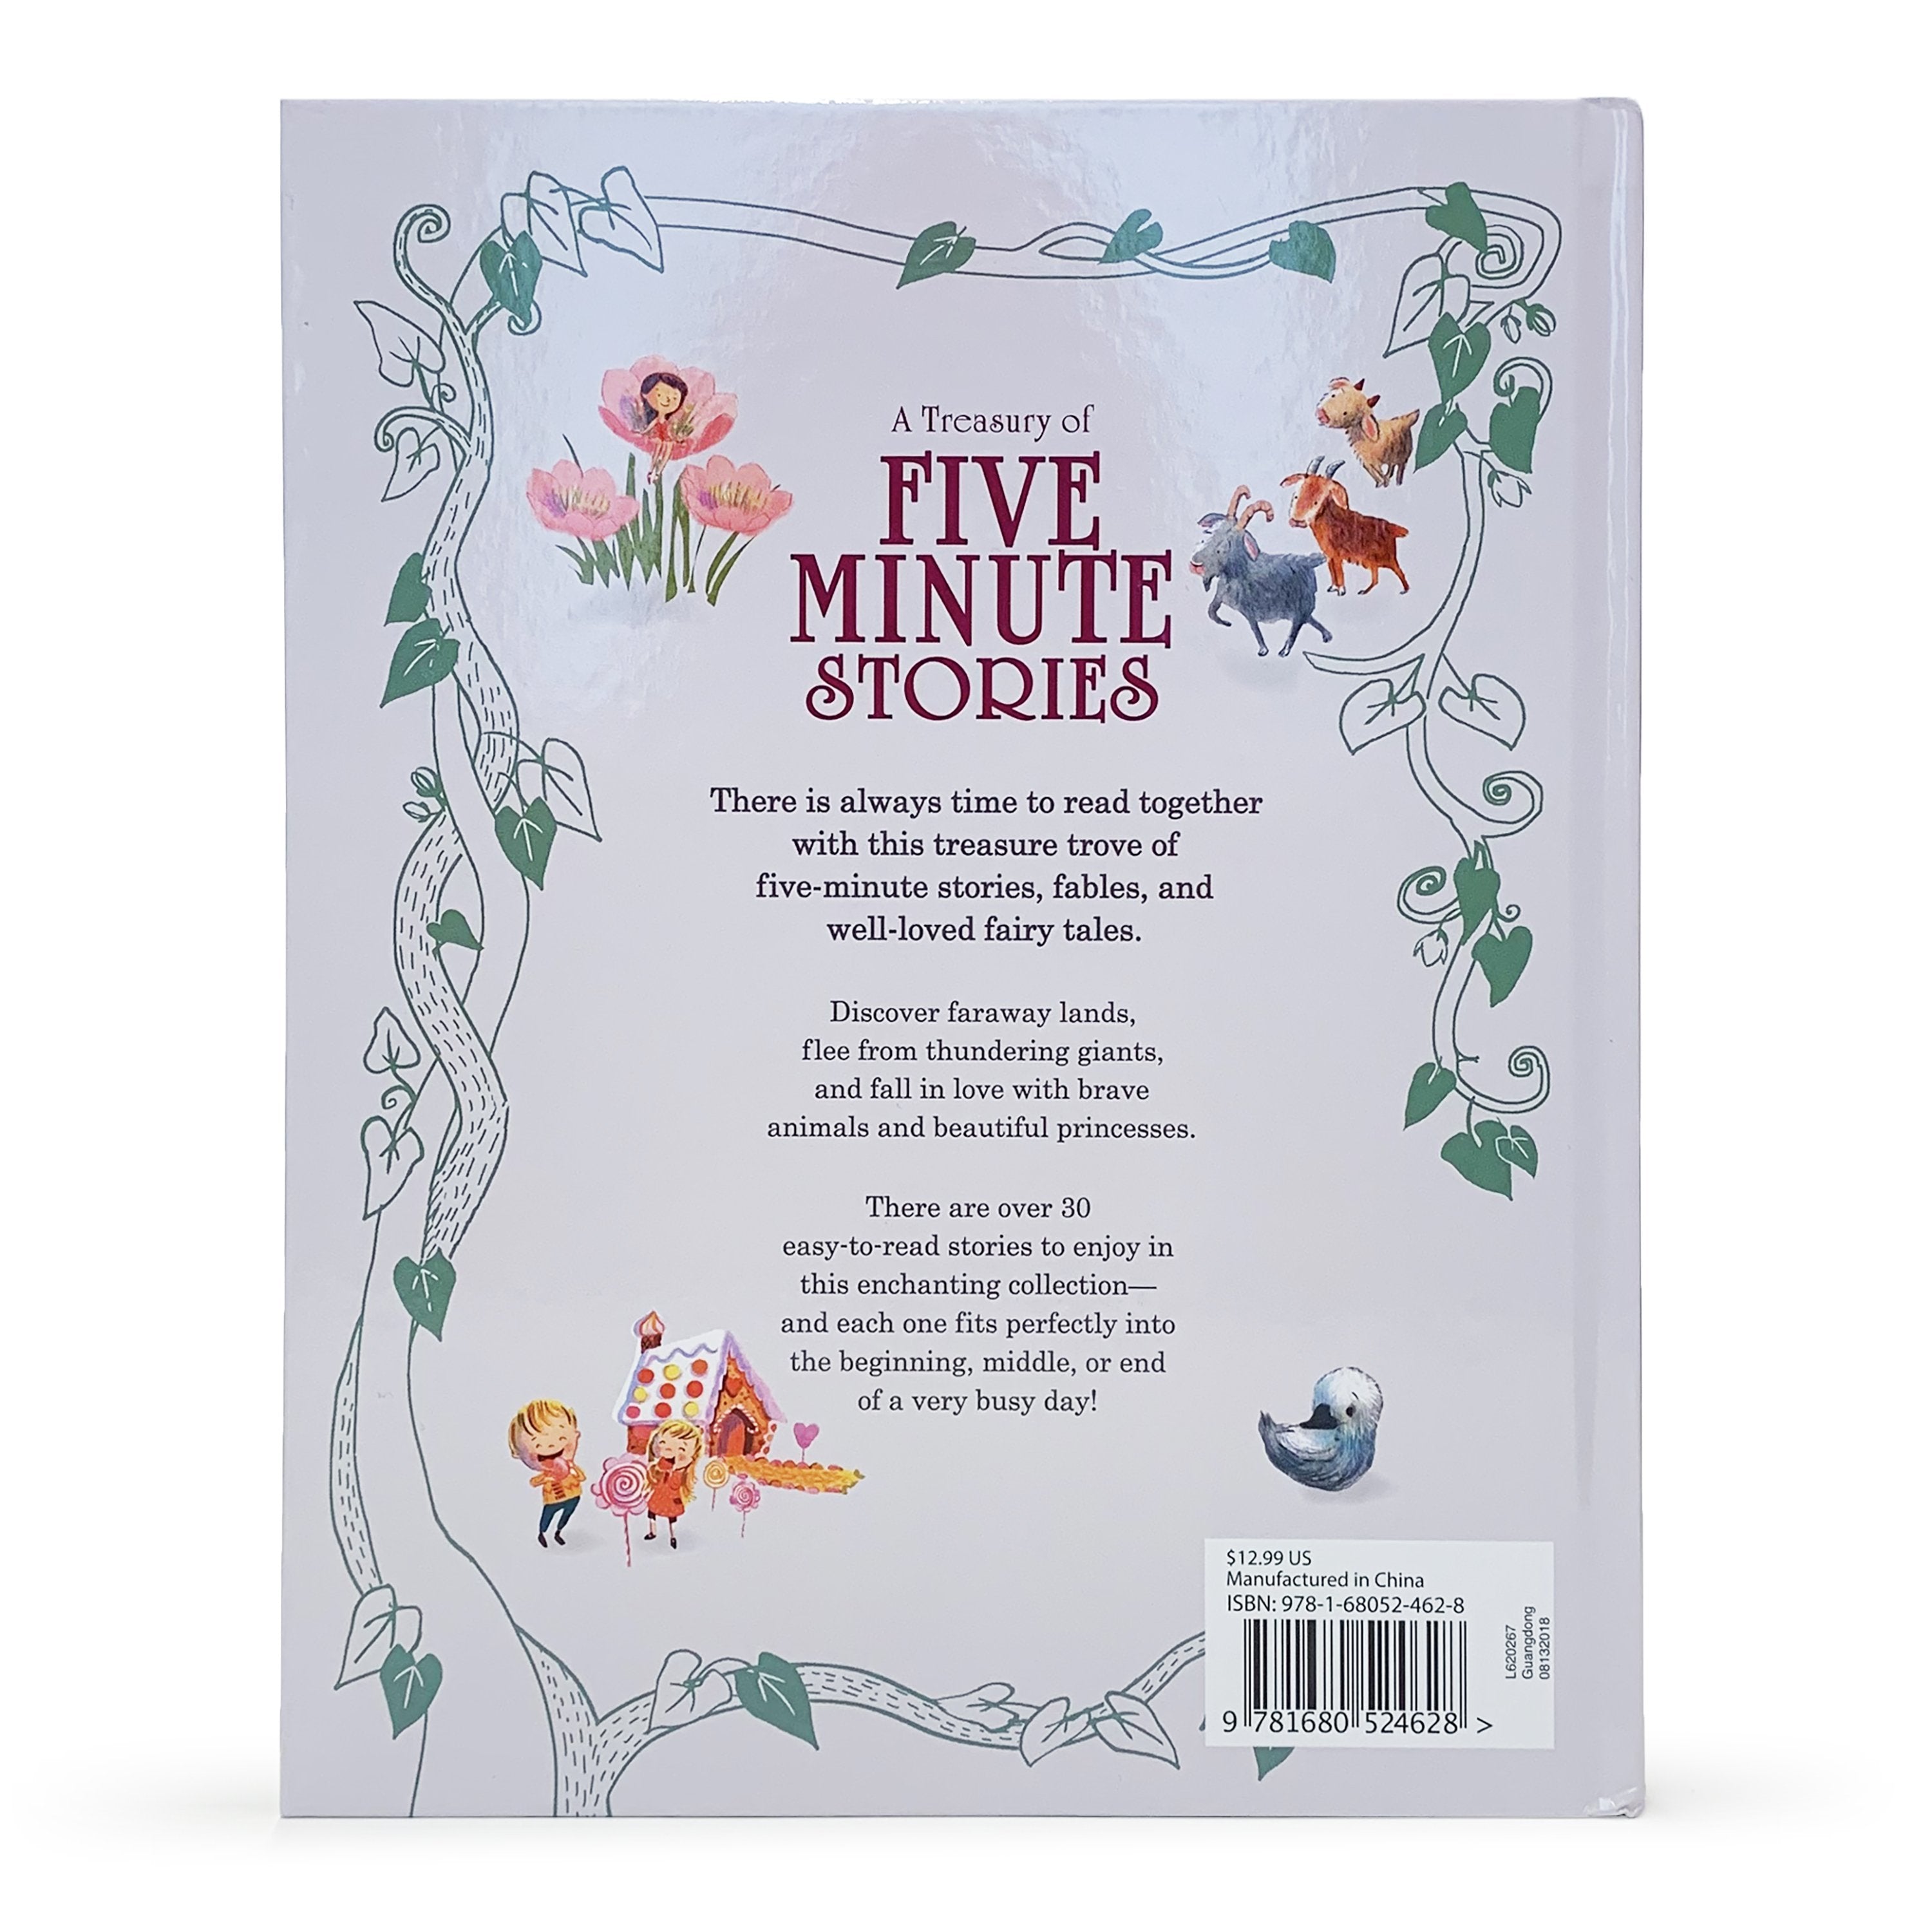 A Treasury of Five Minute Stories    